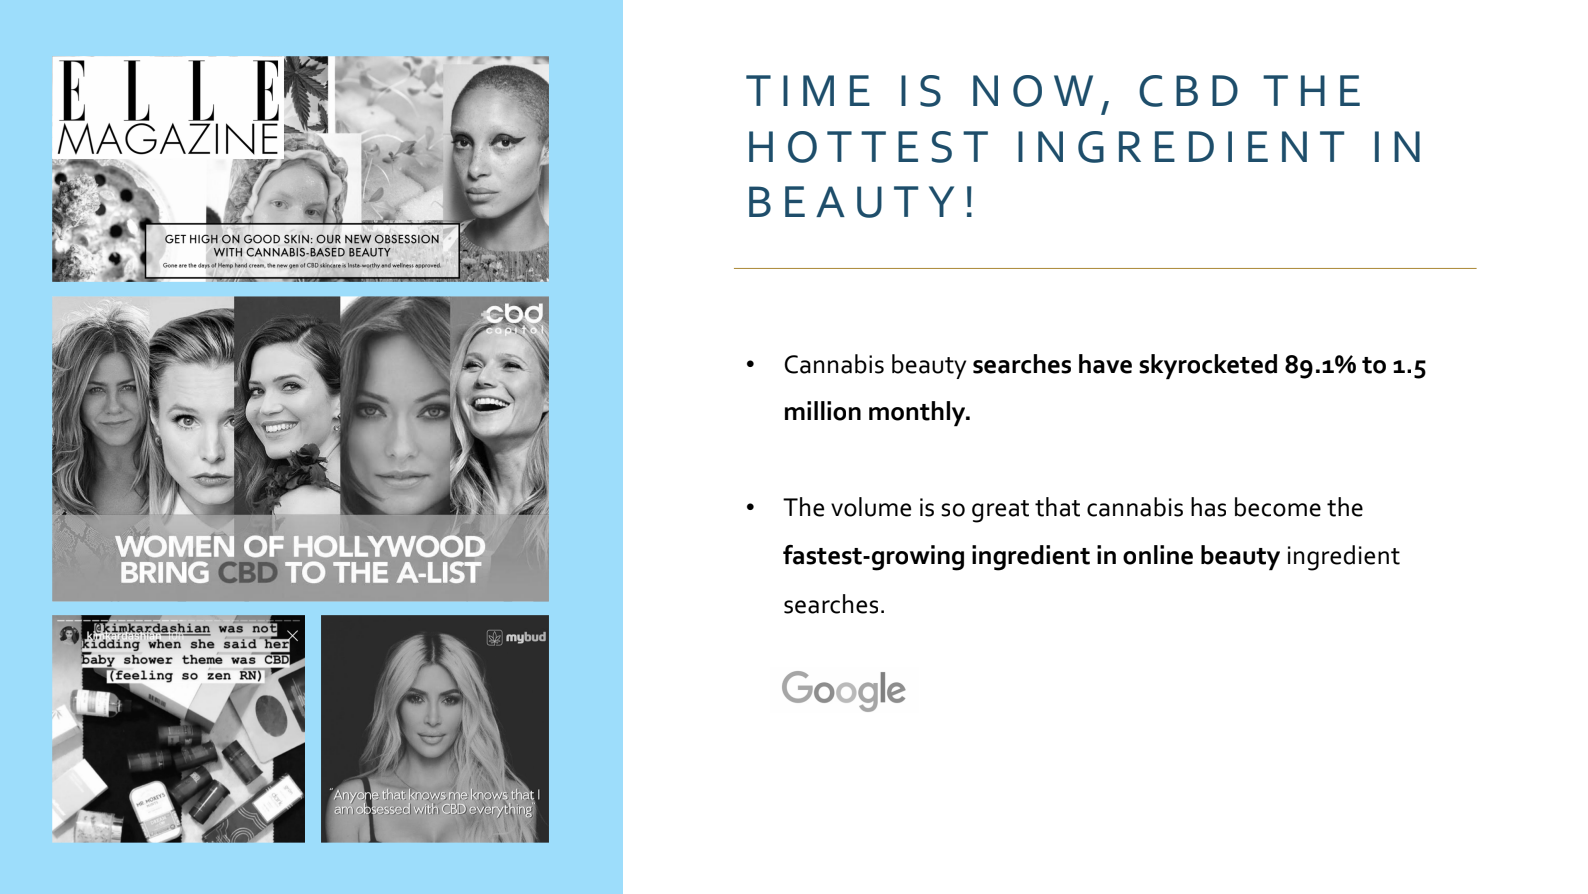 An image showing the after design that Venga created for the business, showing why CBD in beauty is relevant